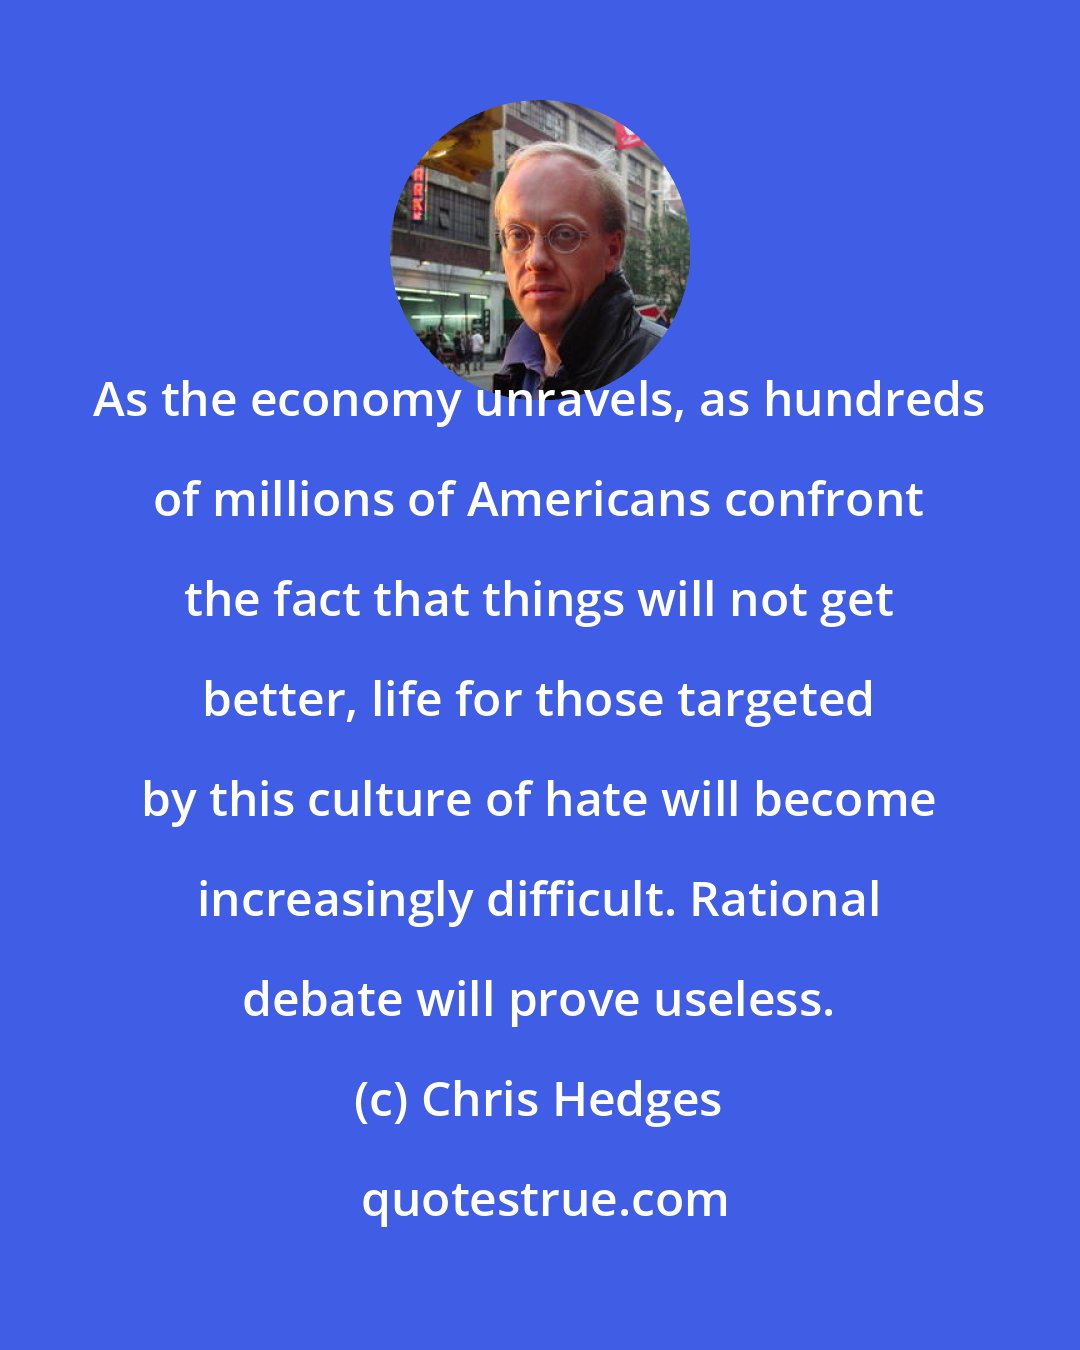 Chris Hedges: As the economy unravels, as hundreds of millions of Americans confront the fact that things will not get better, life for those targeted by this culture of hate will become increasingly difficult. Rational debate will prove useless.